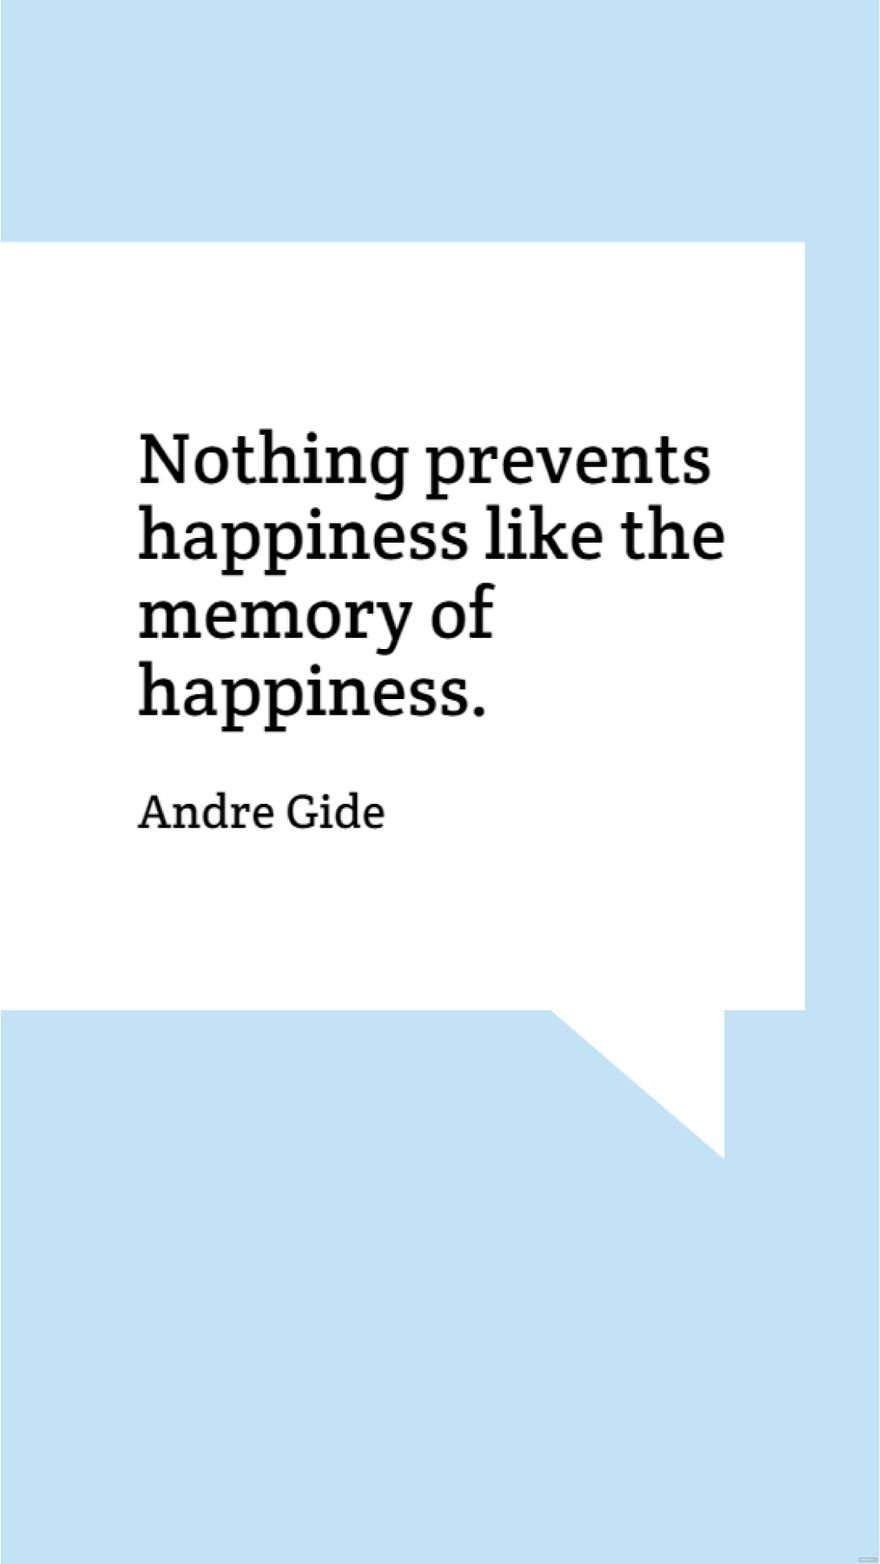 Andre Gide - Nothing prevents happiness like the memory of happiness. in JPG